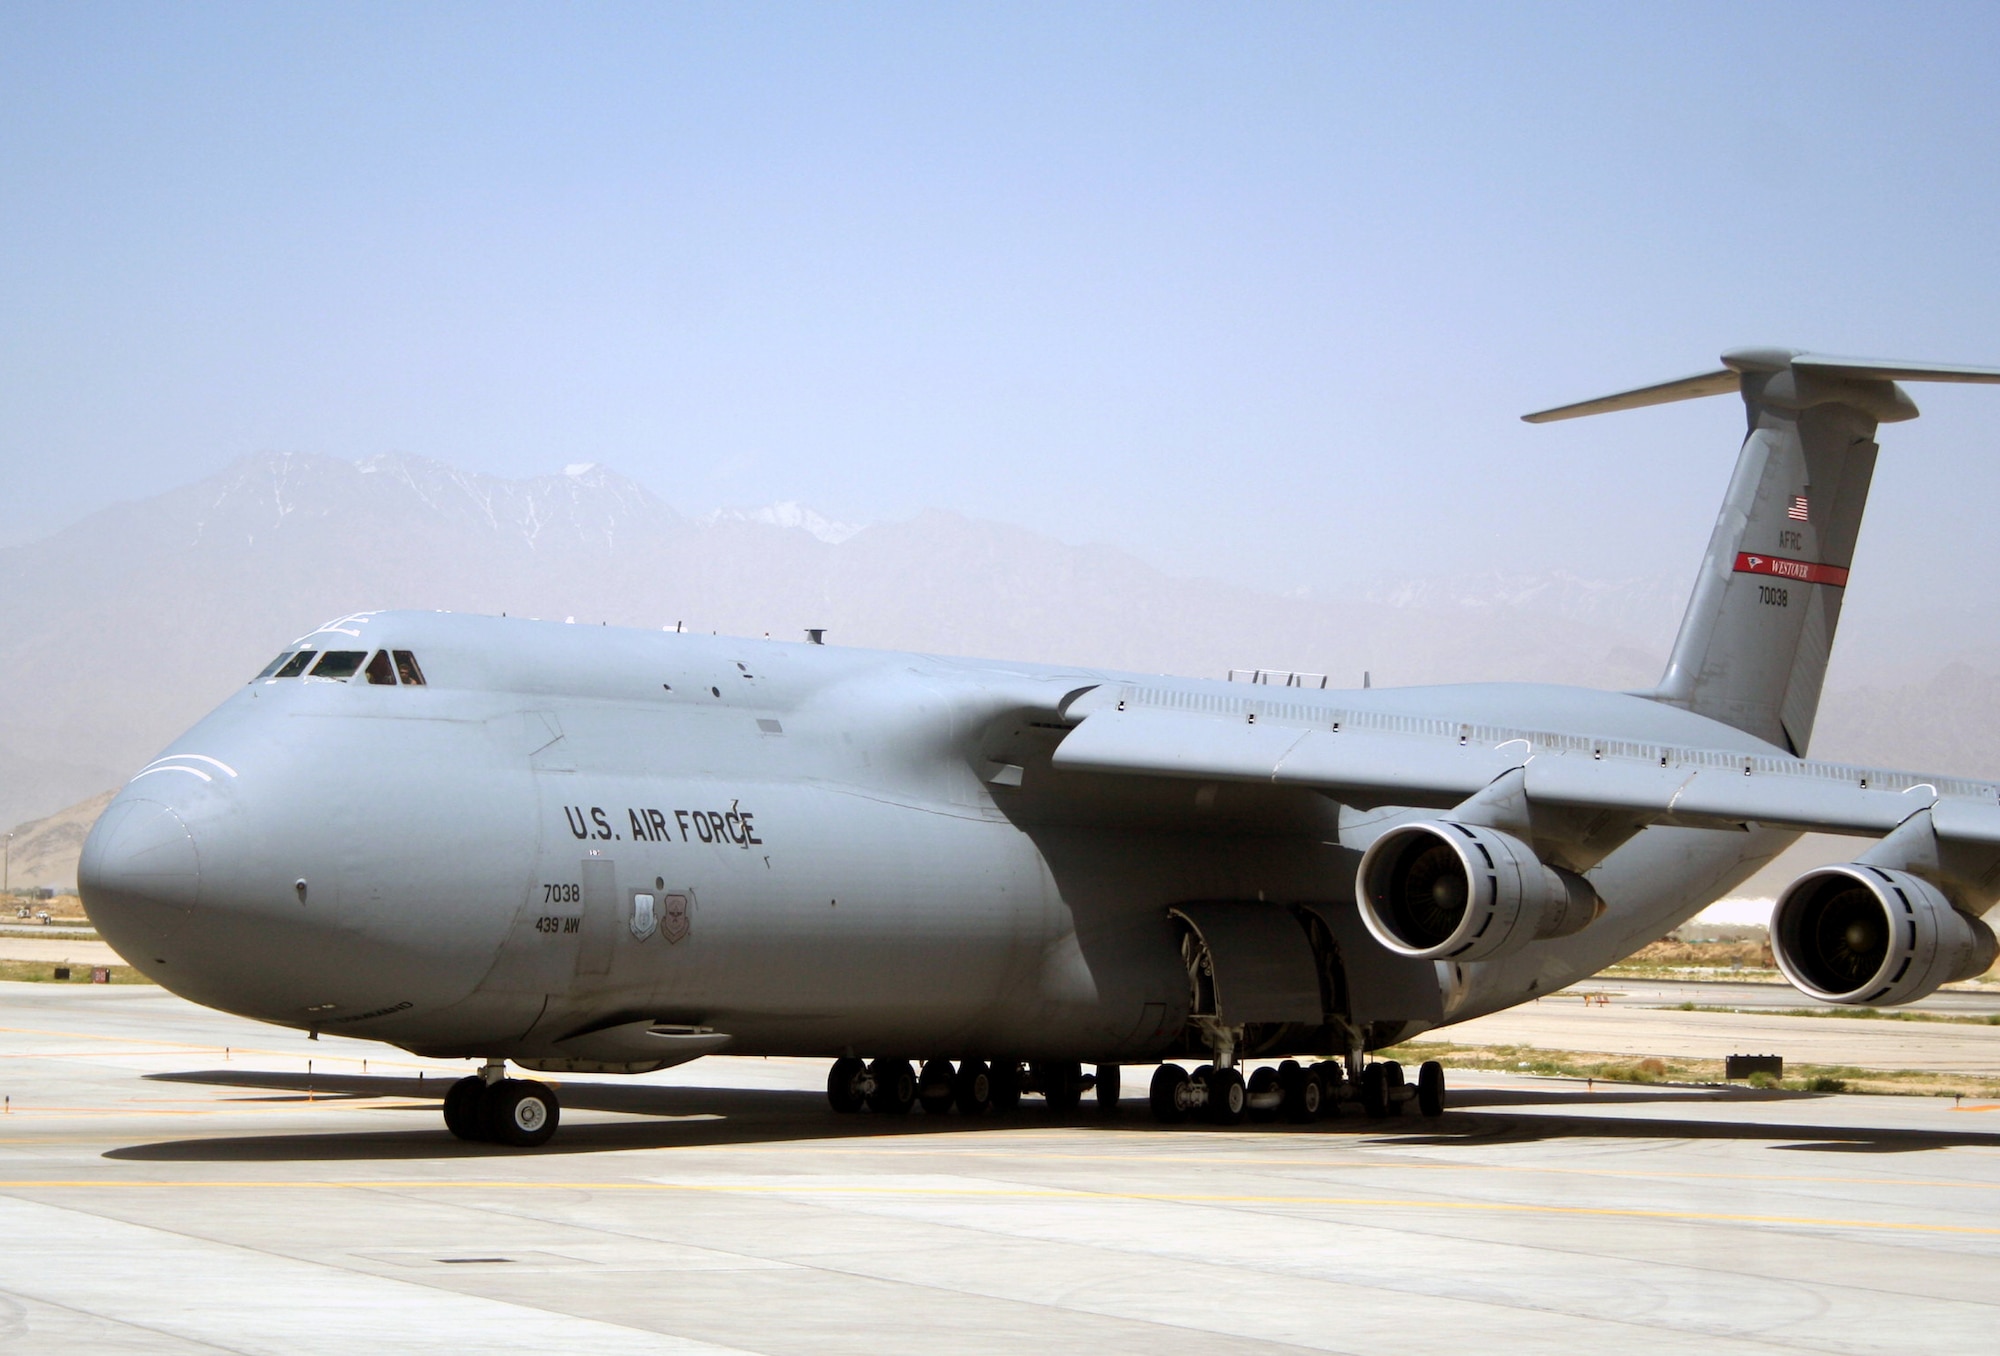 A C-5 Galaxy taxies after landing as part of an airlift mission at Bagram Airfield, Afghanistan, on June 6, 2011. The C-5 is the Air Force's largest airlift aircraft. (U.S. Air Force Photo/Master Sgt. Scott T. Sturkol)